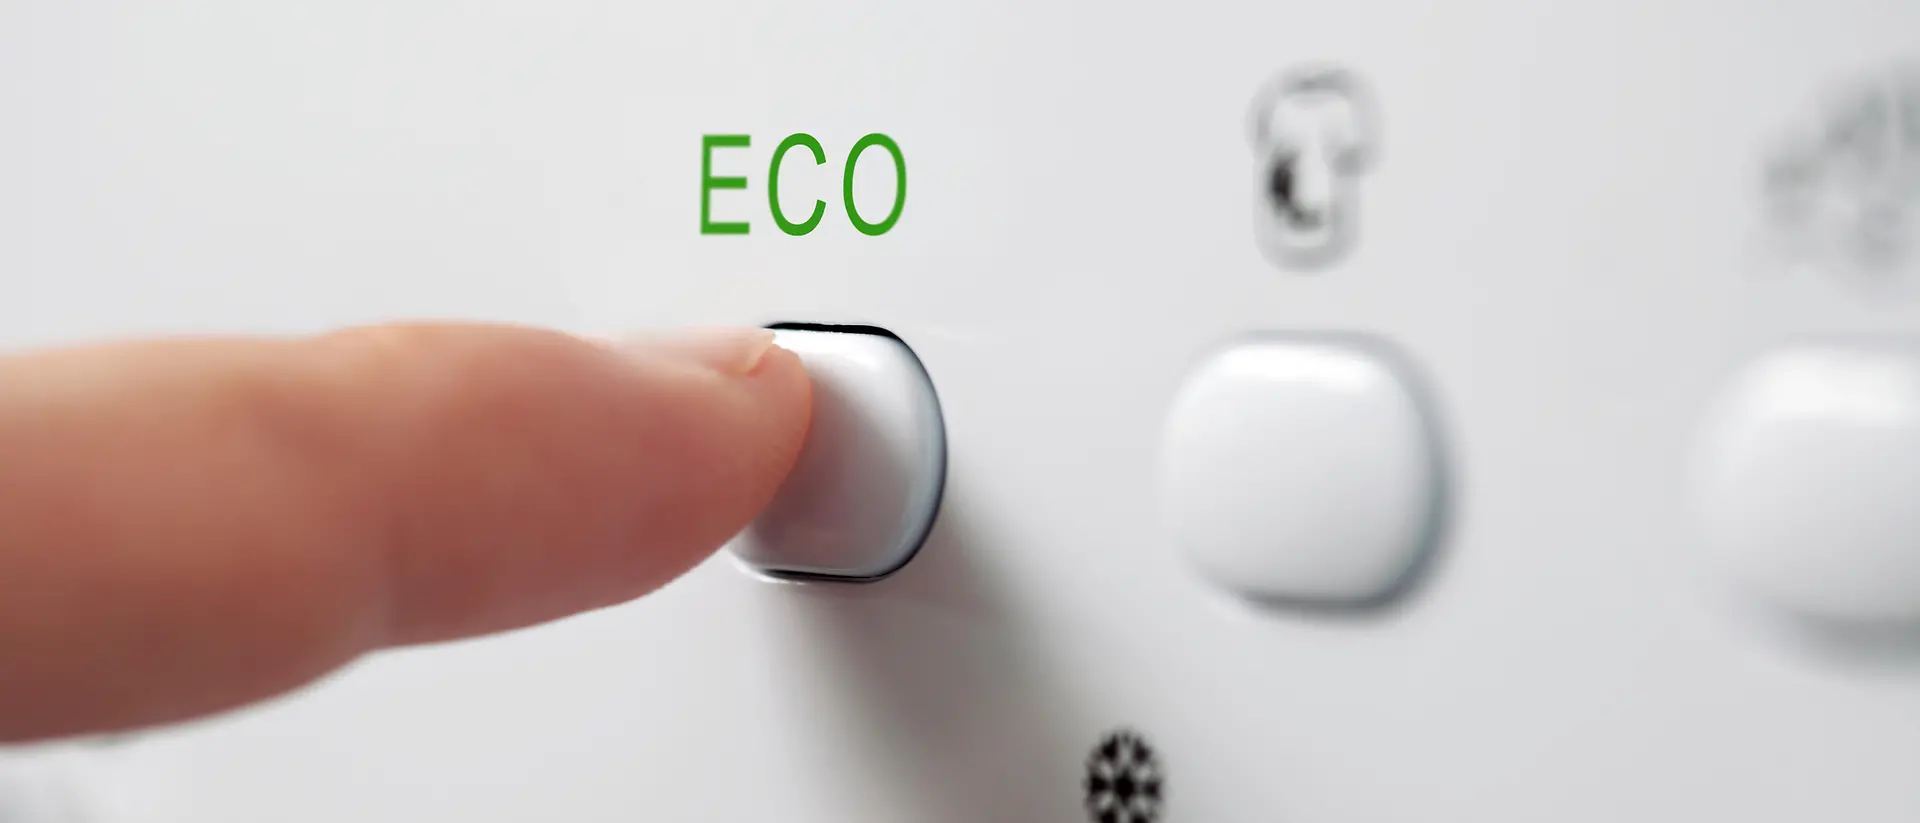 Energy Efficient Appliances and How to Reduce Your Carbon Footprint